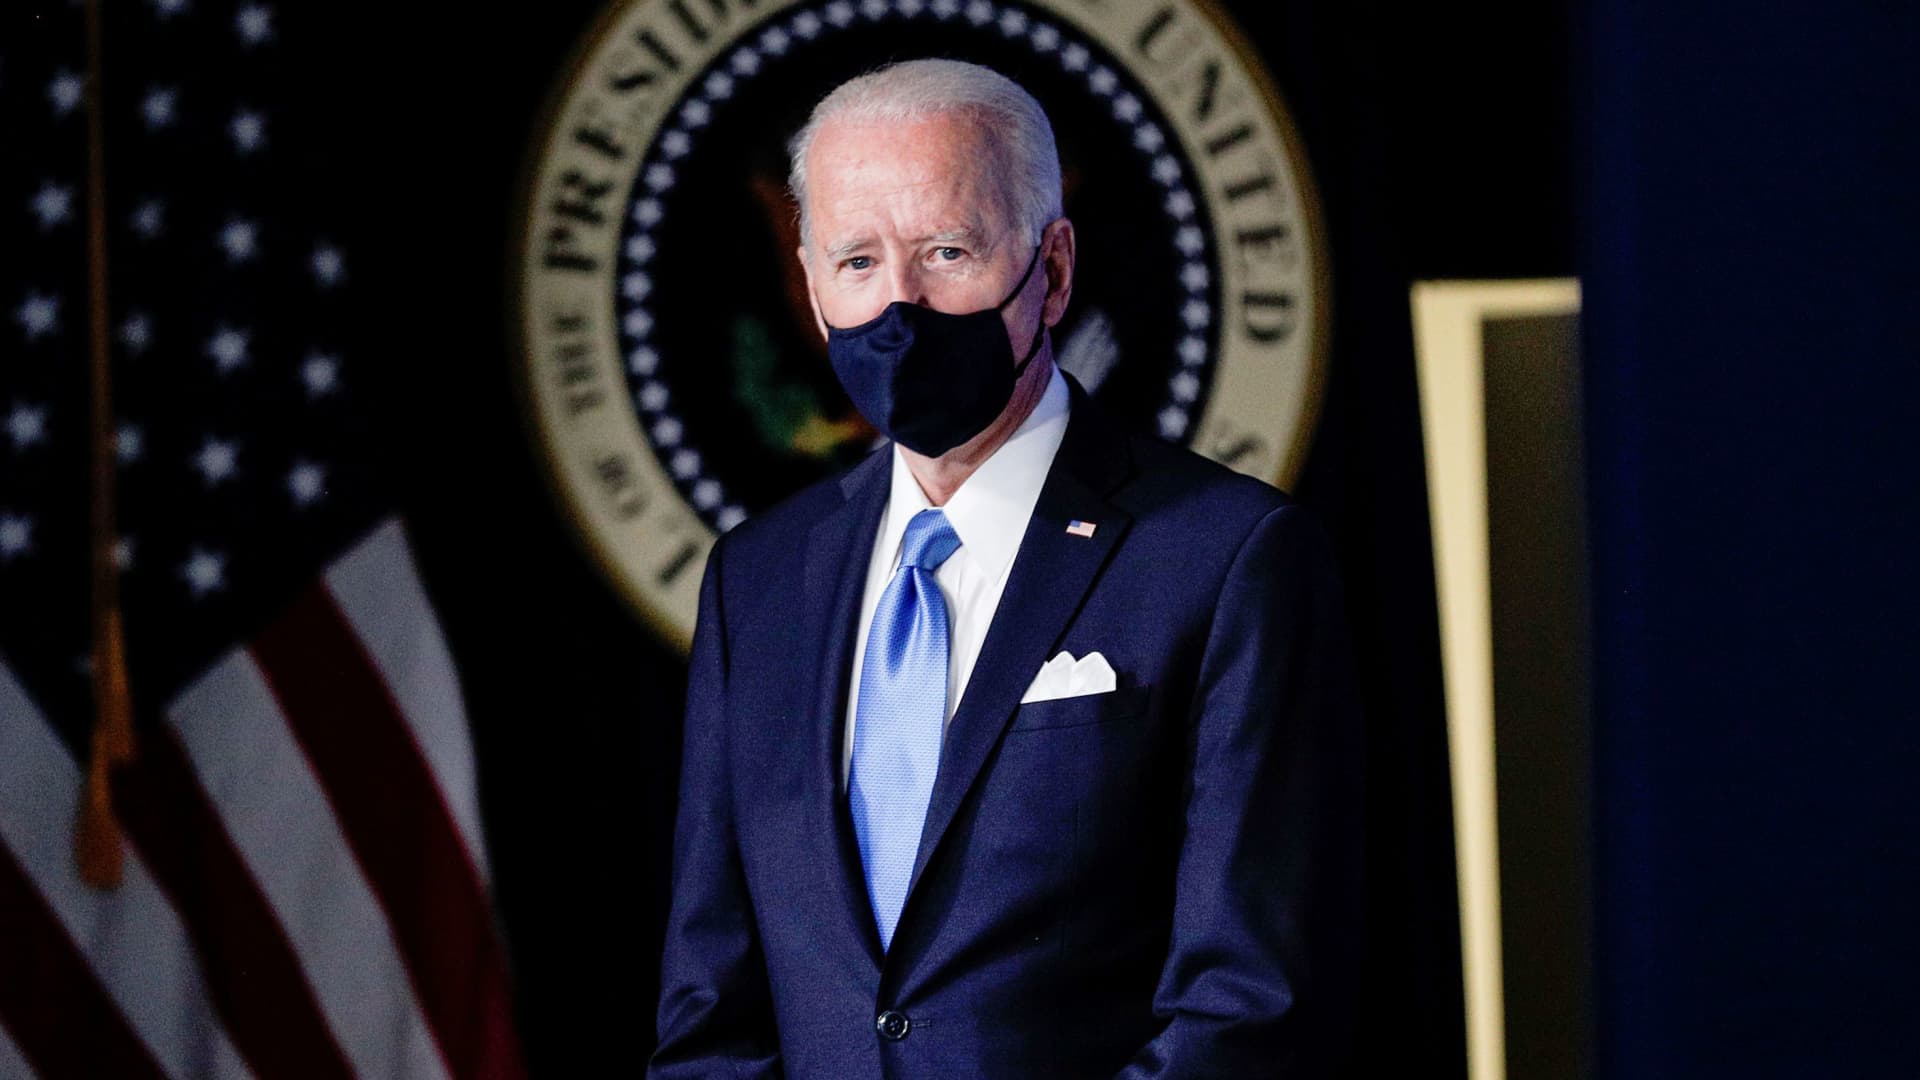 U.S. President Joe Biden attends an event where he announced administration plans to double its order of the single-shot Johnson & Johnson coronavirus vaccine, procuring an additional 100 million doses, in the South Court Auditorium at the White House in Washington, March 10, 2021.